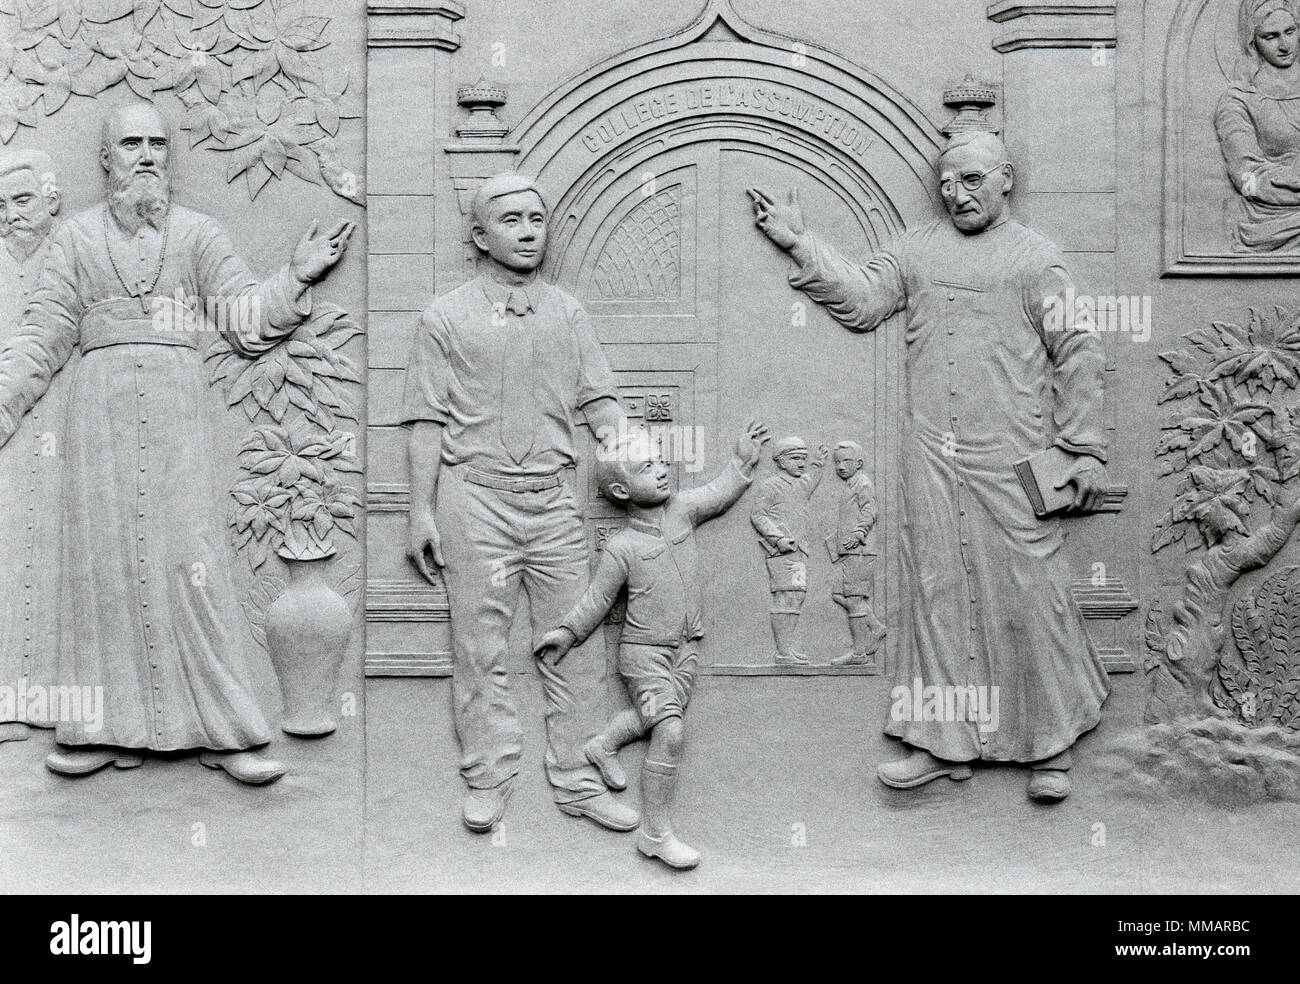 Relief art outside the Roman Catholic Assumption Cathedral in Bangkok in Thailand in Southeast Asia Far East. Religion Religious Christian Travel B&W Stock Photo